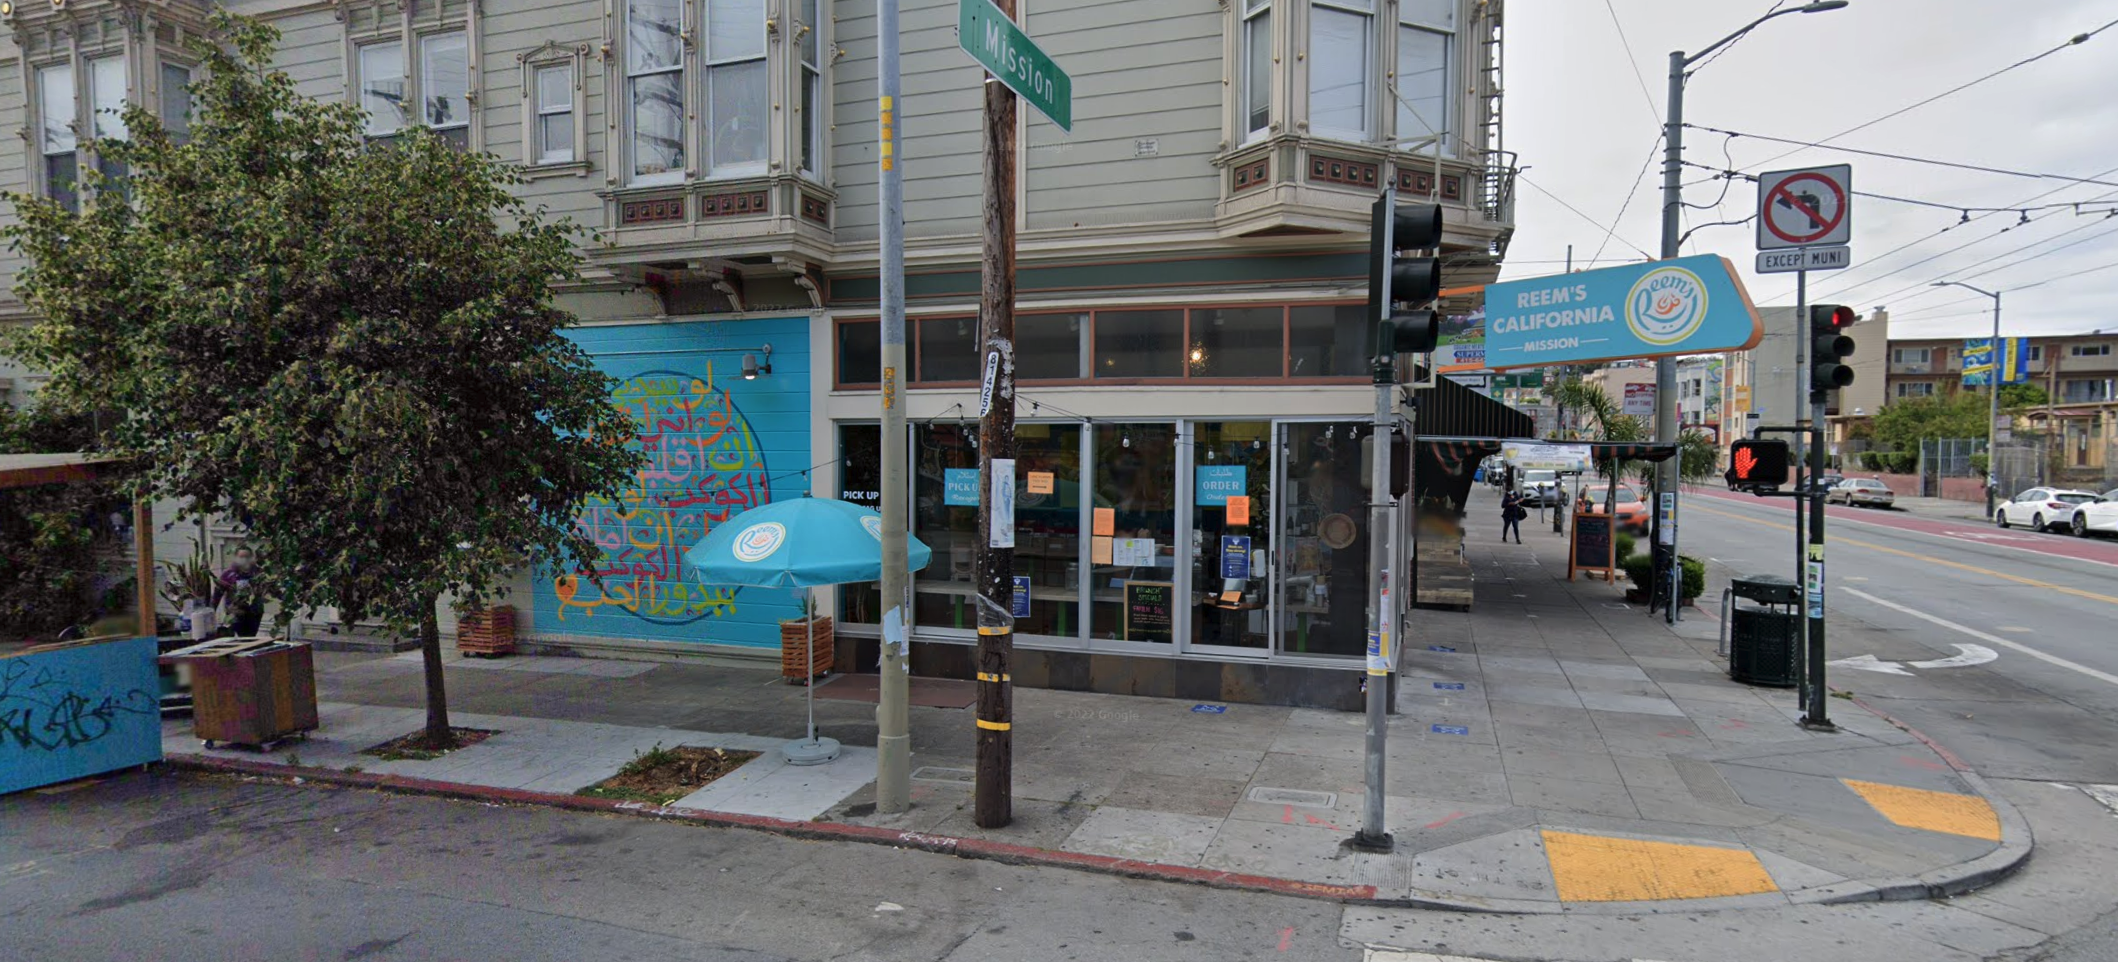 San Francisco Police Union Furious as Bakery Refuses Cop Service